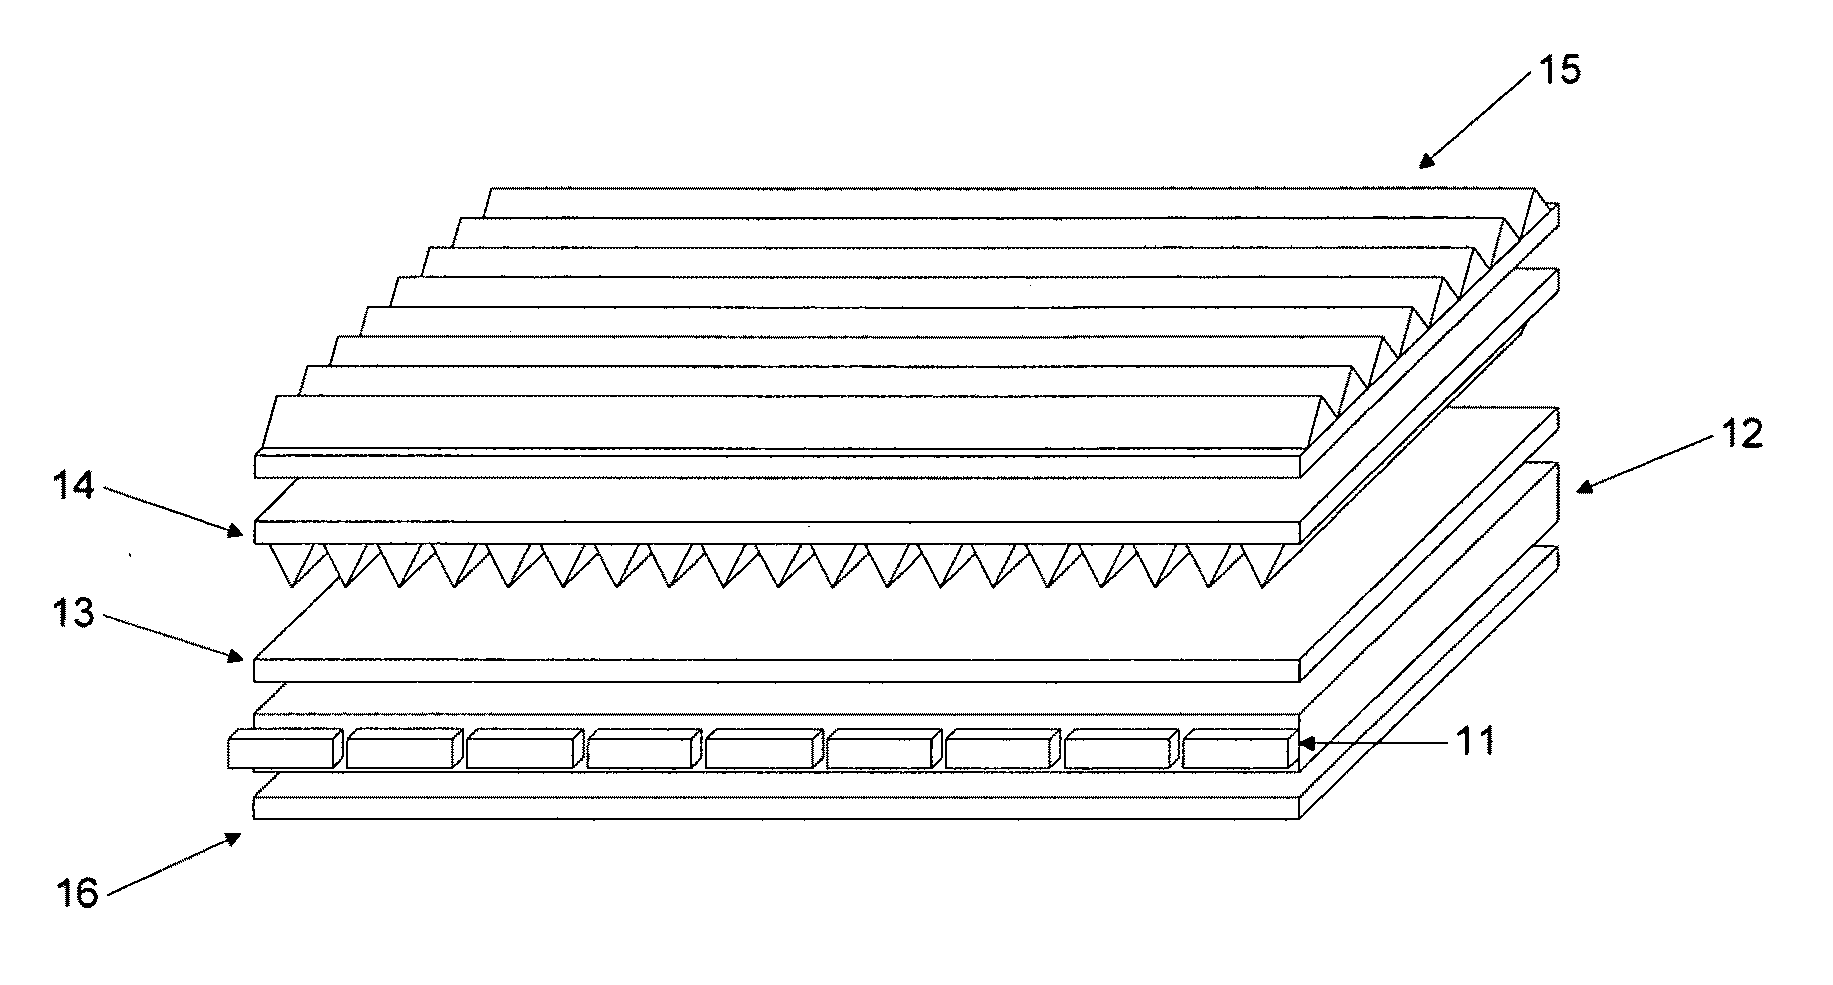 Backlight device for dual-view display